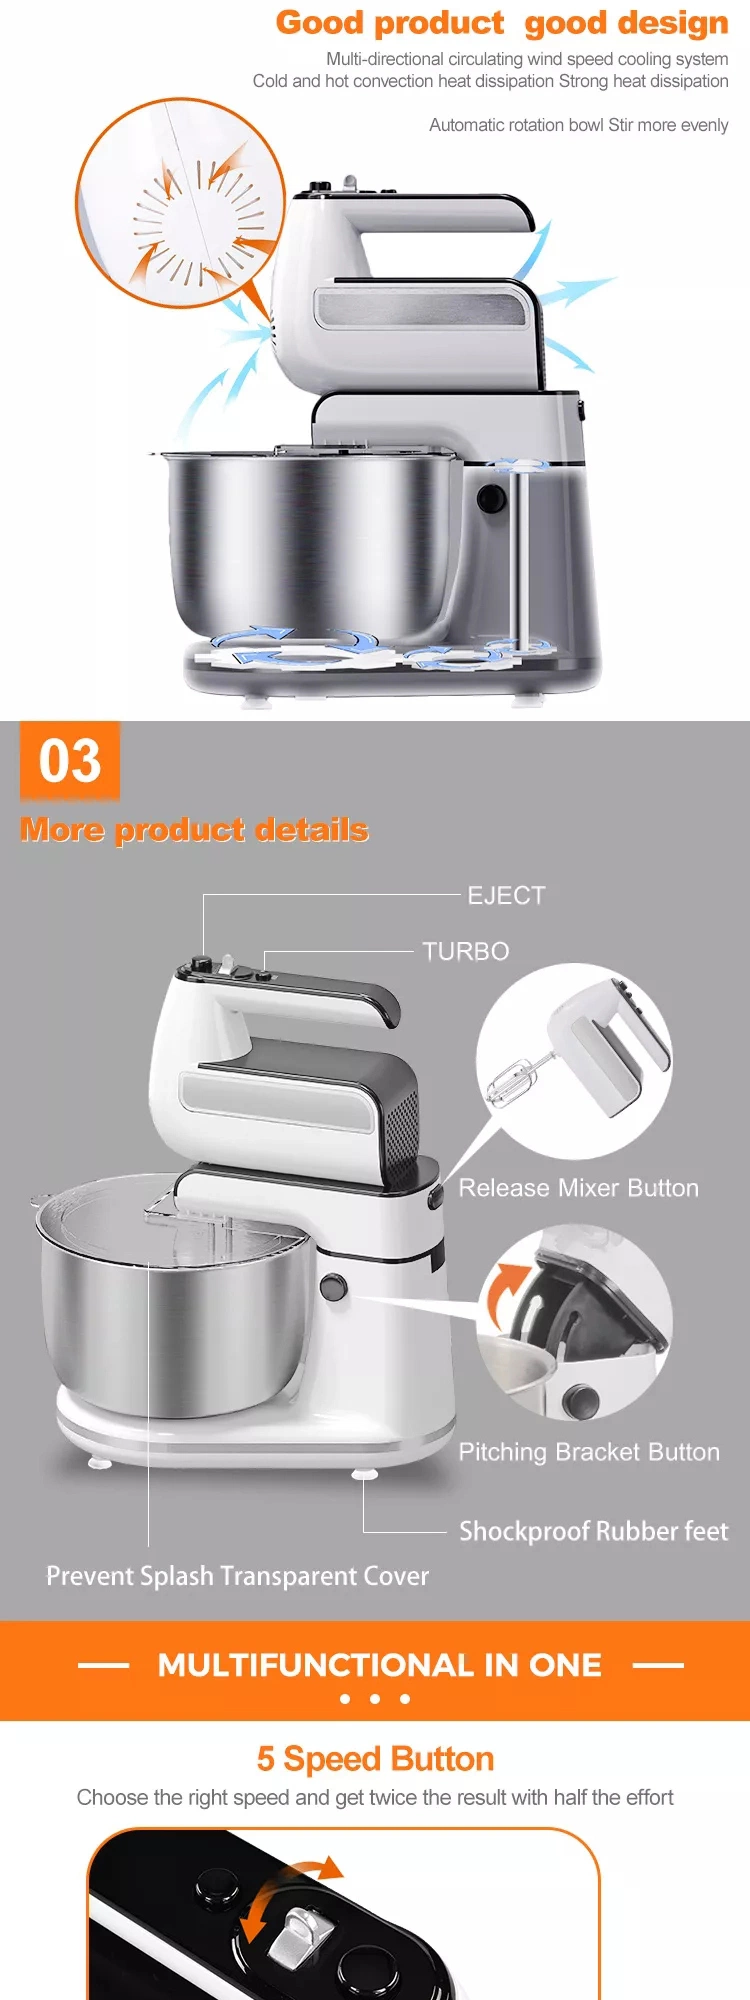 Kitchen Stand Food Mixer New ABS Plastic Electric Cake Mixer Manufacture Pastry Mixers